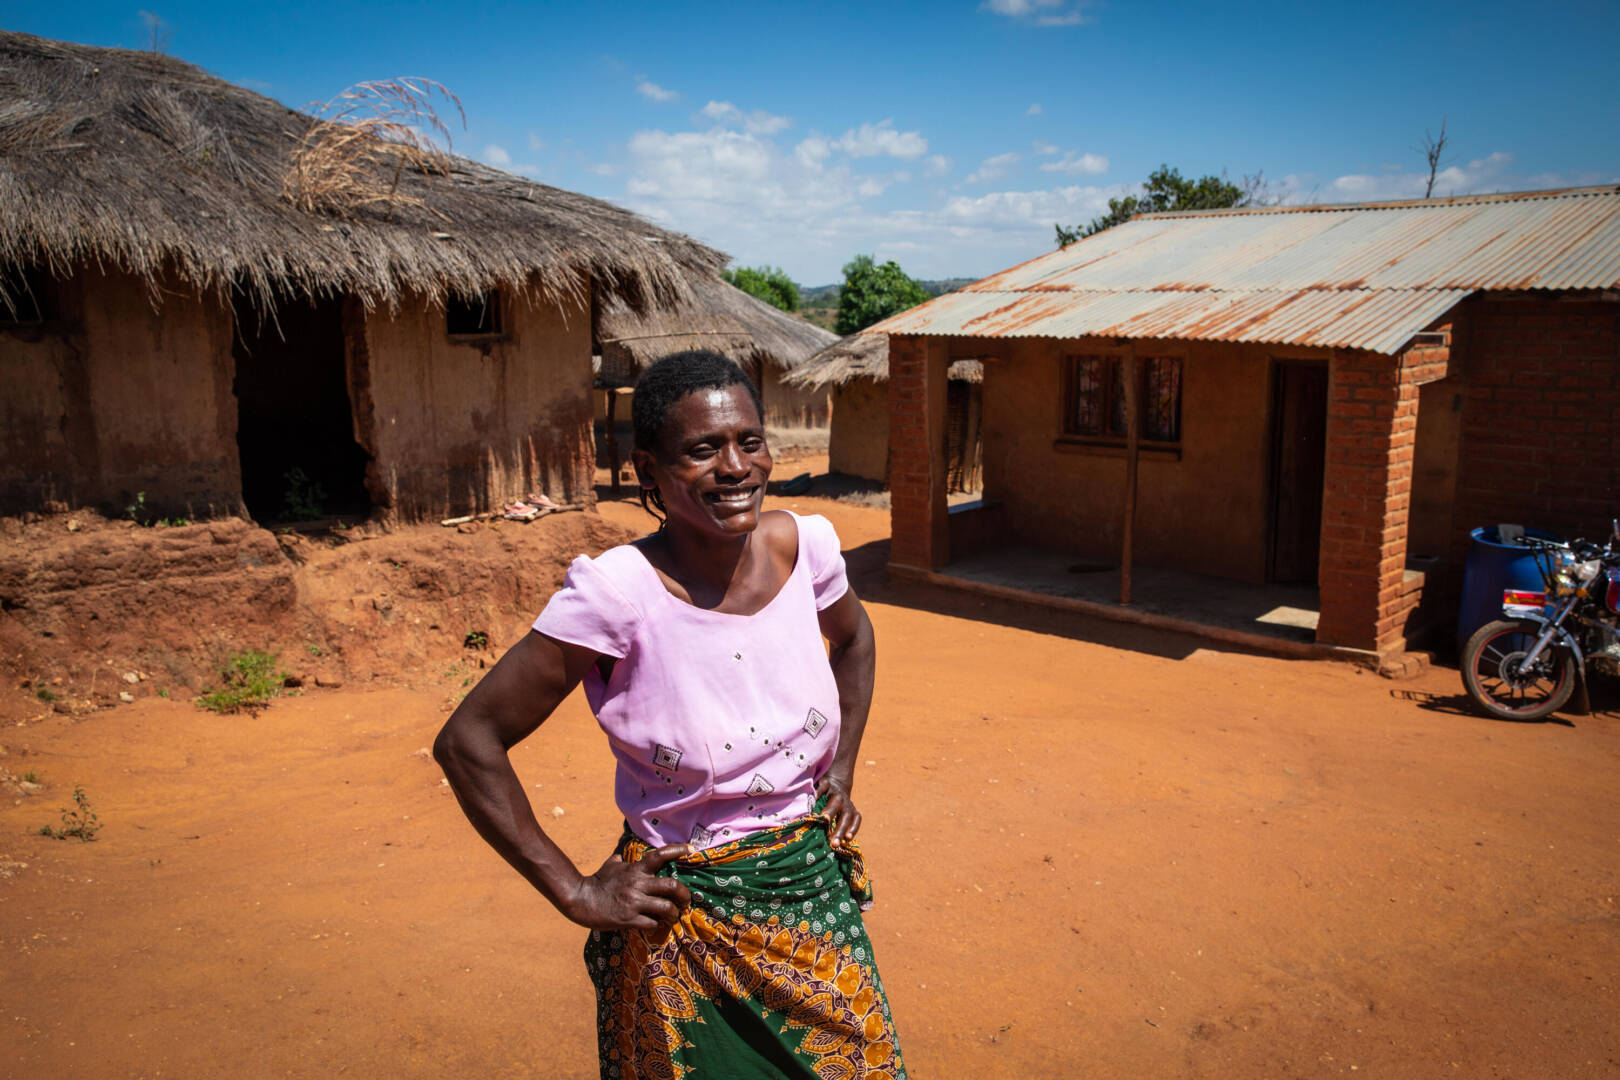 A woman stands, hands on her hips. Behind her is a mud hut with a thatched roof, and a newer building made of brick.